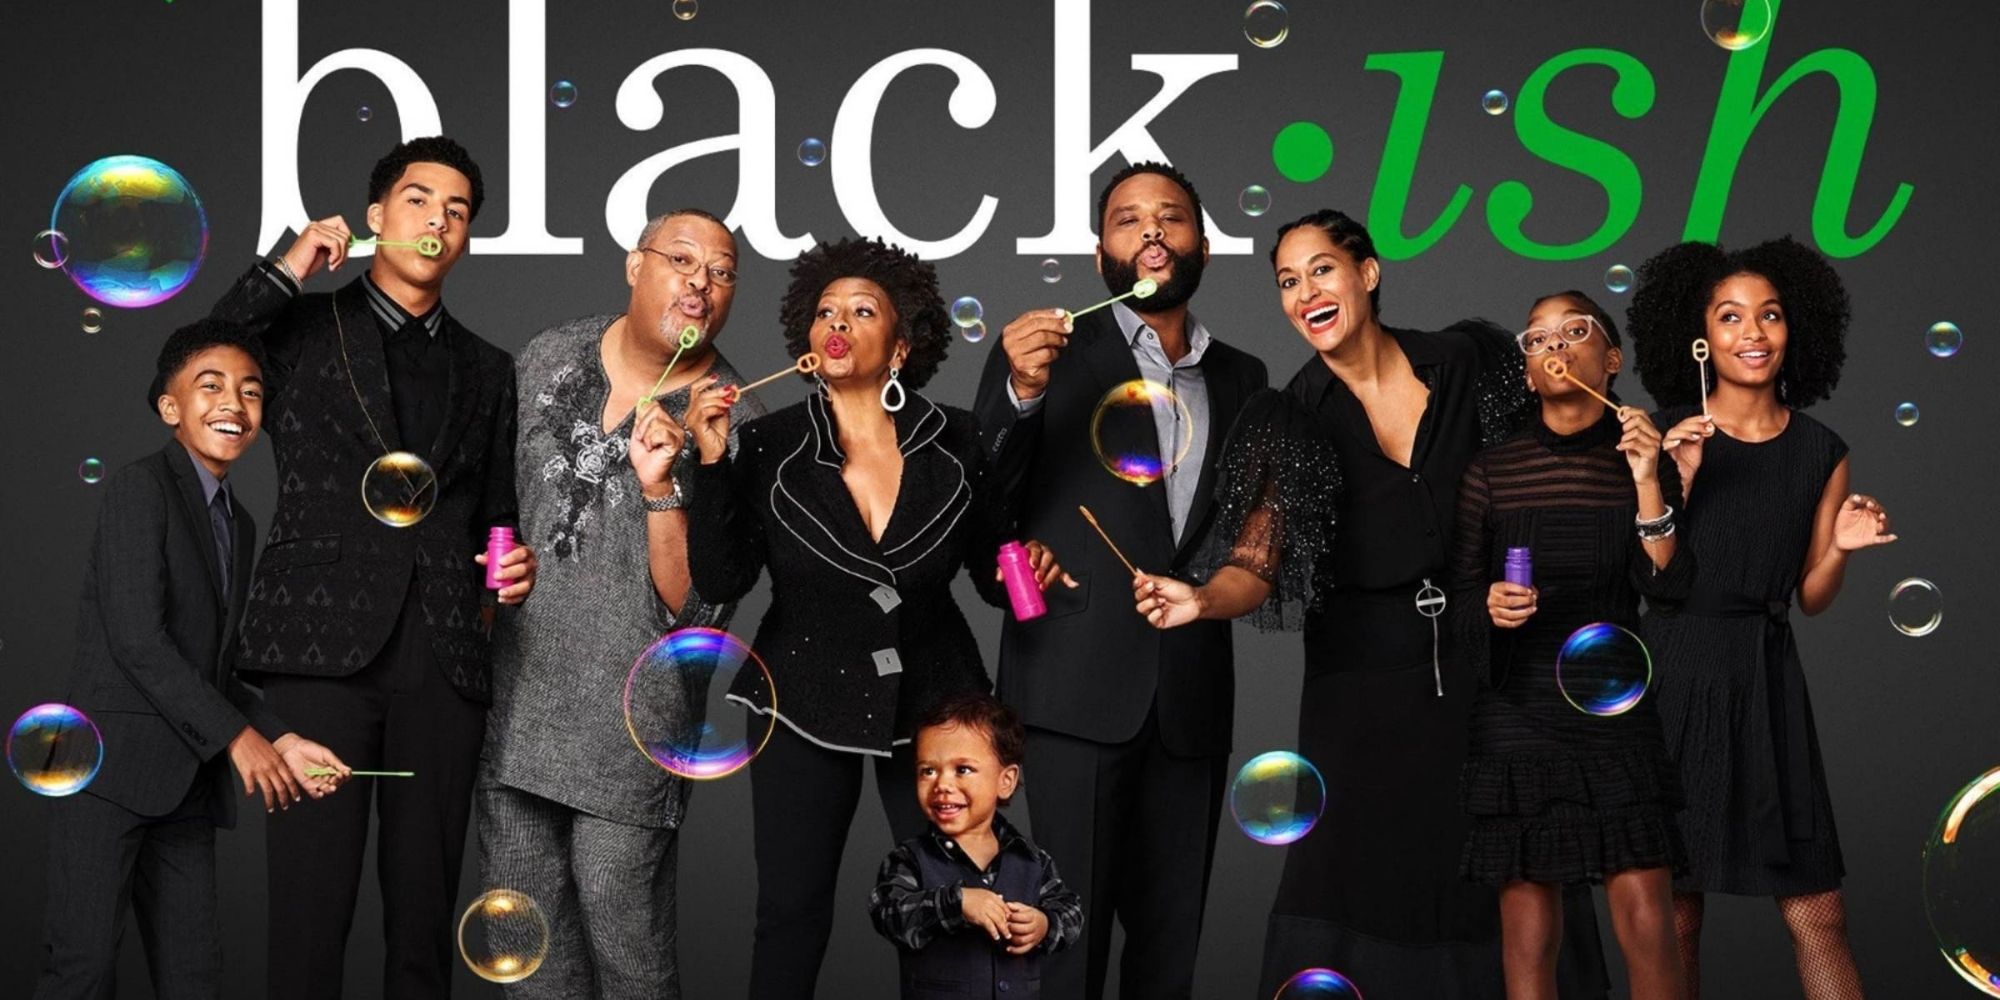 With eight seasons, 'Black-ish' is the perfect comedy sitcom to binge with the whole family! Find out how you can watch the acclaimed series online.